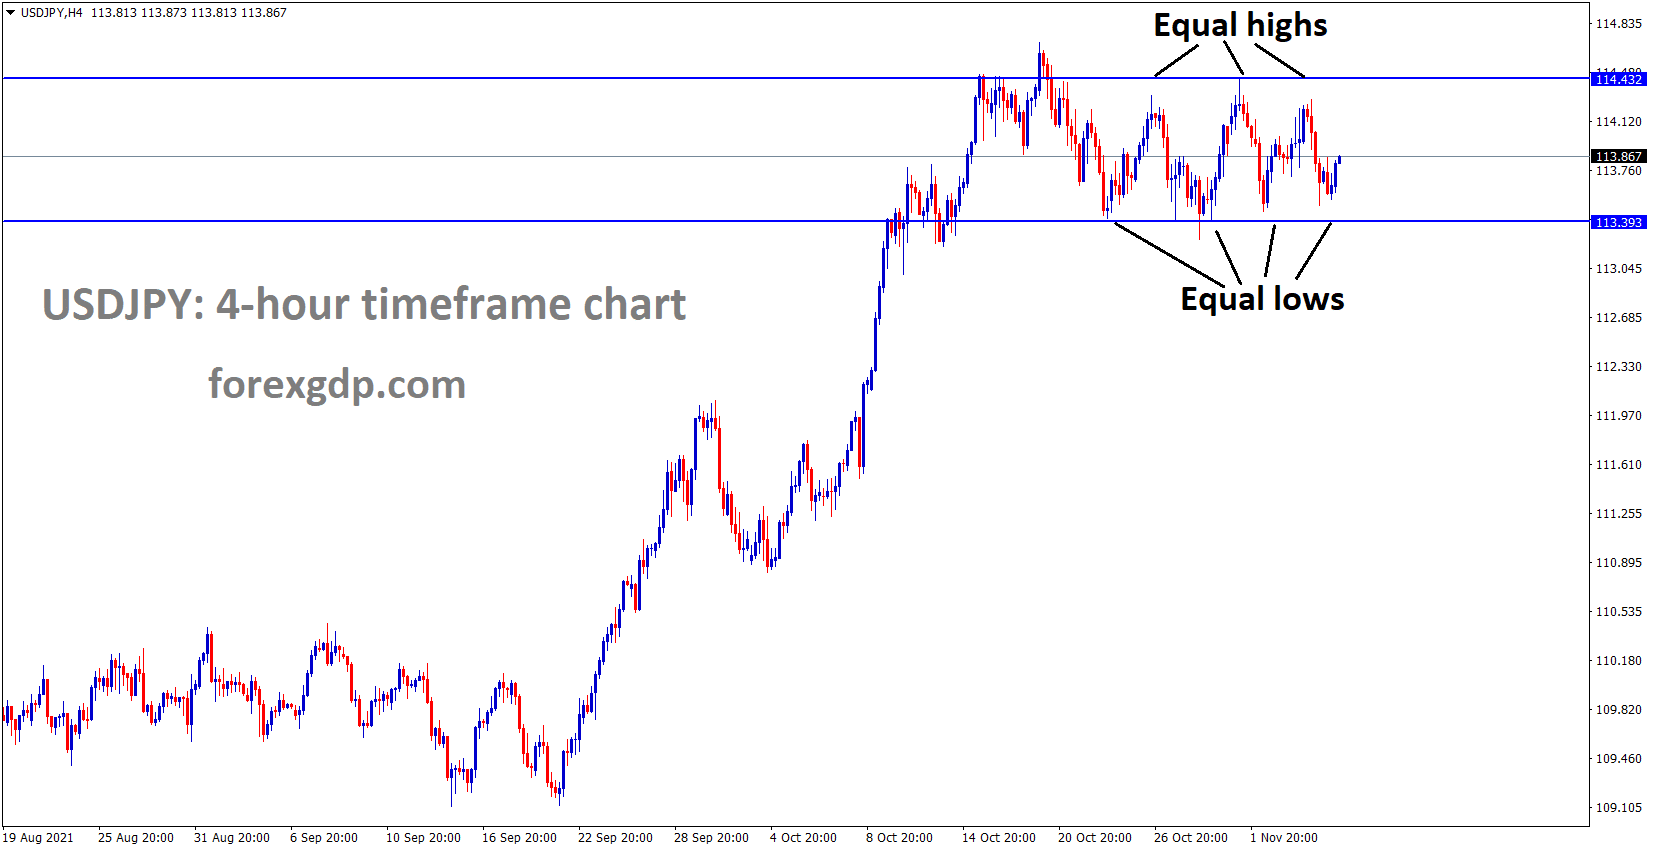 USDJPY is moving in the Box pattern and the market rebounded from Equal lows and Equal highs area.